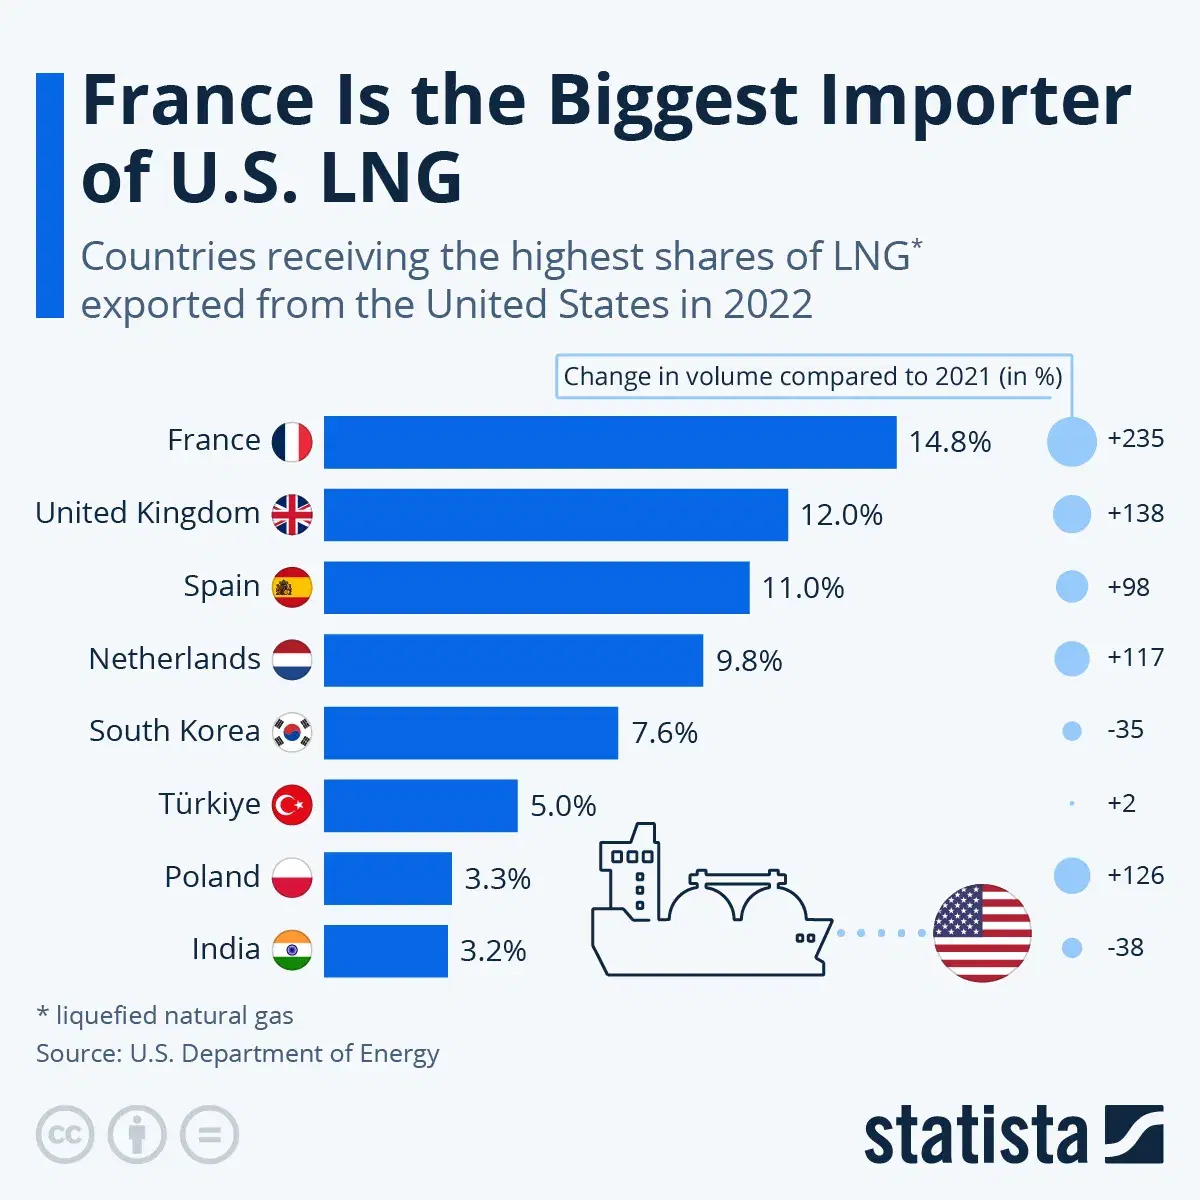 Which Country Imports The Most LNG From the U.S.?